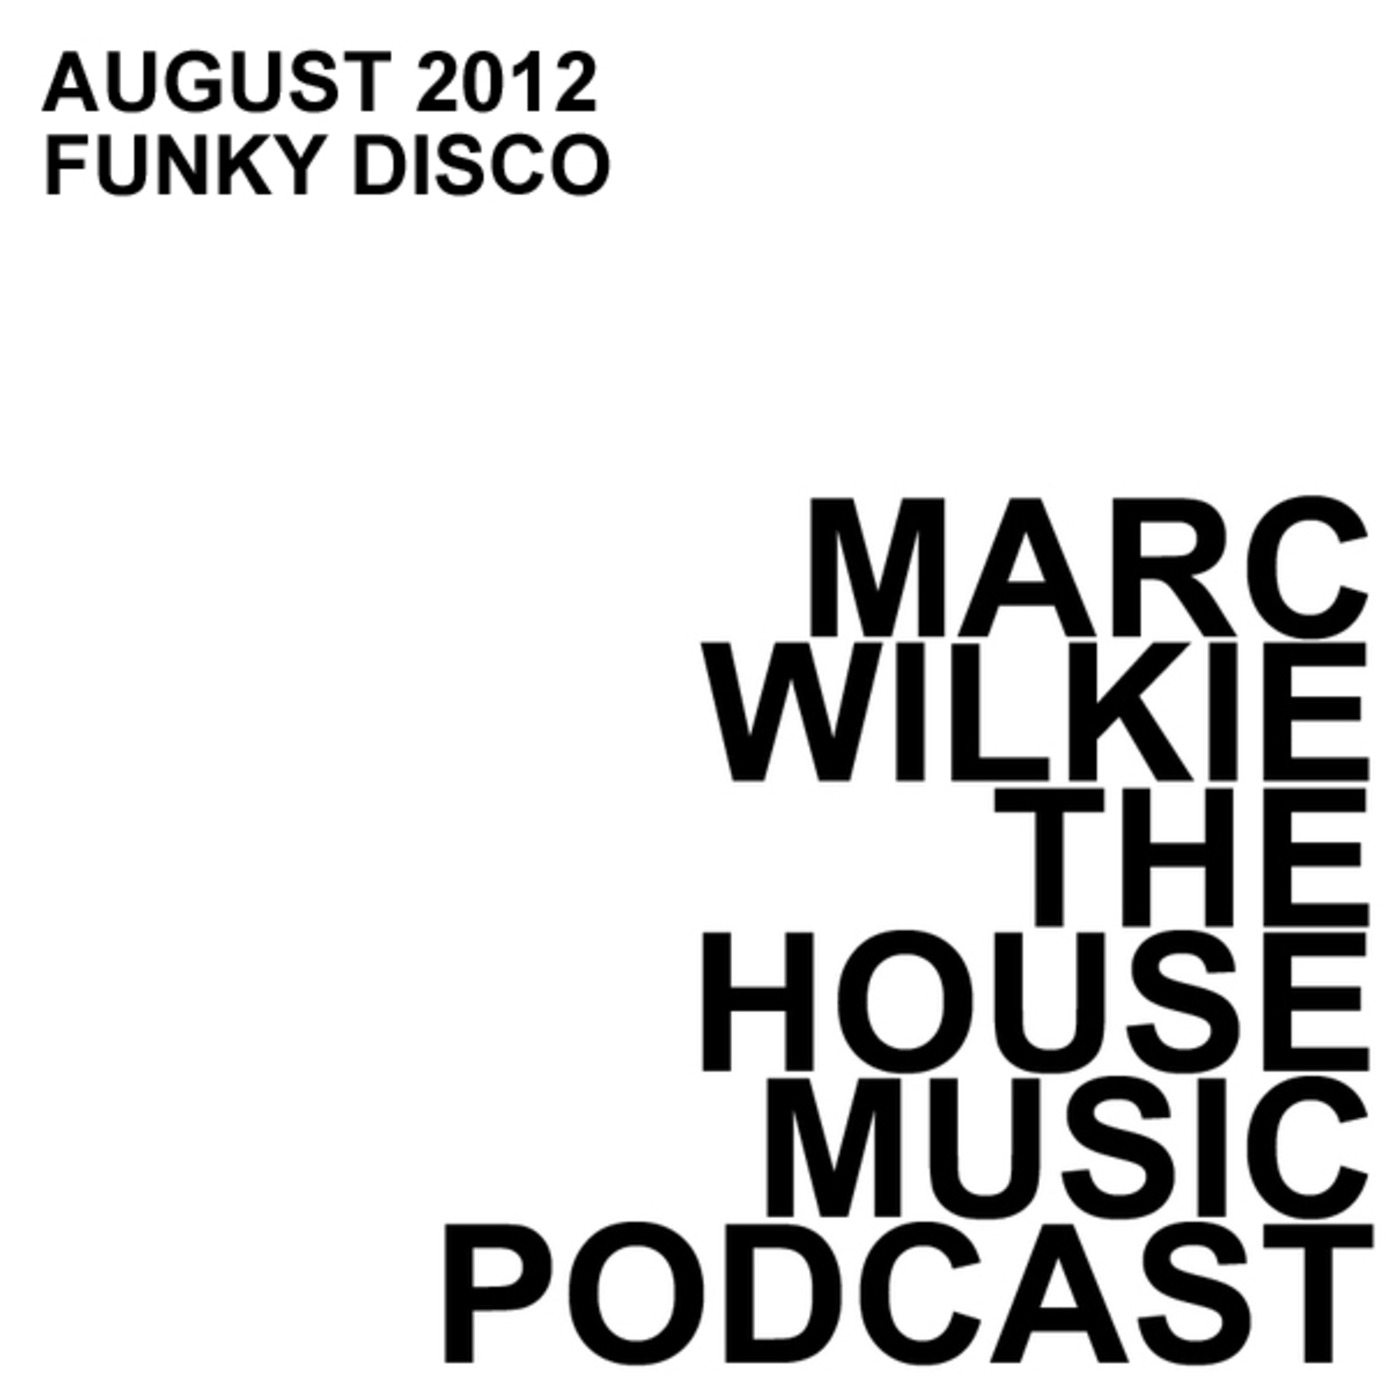 August 2012 - Funky Disco